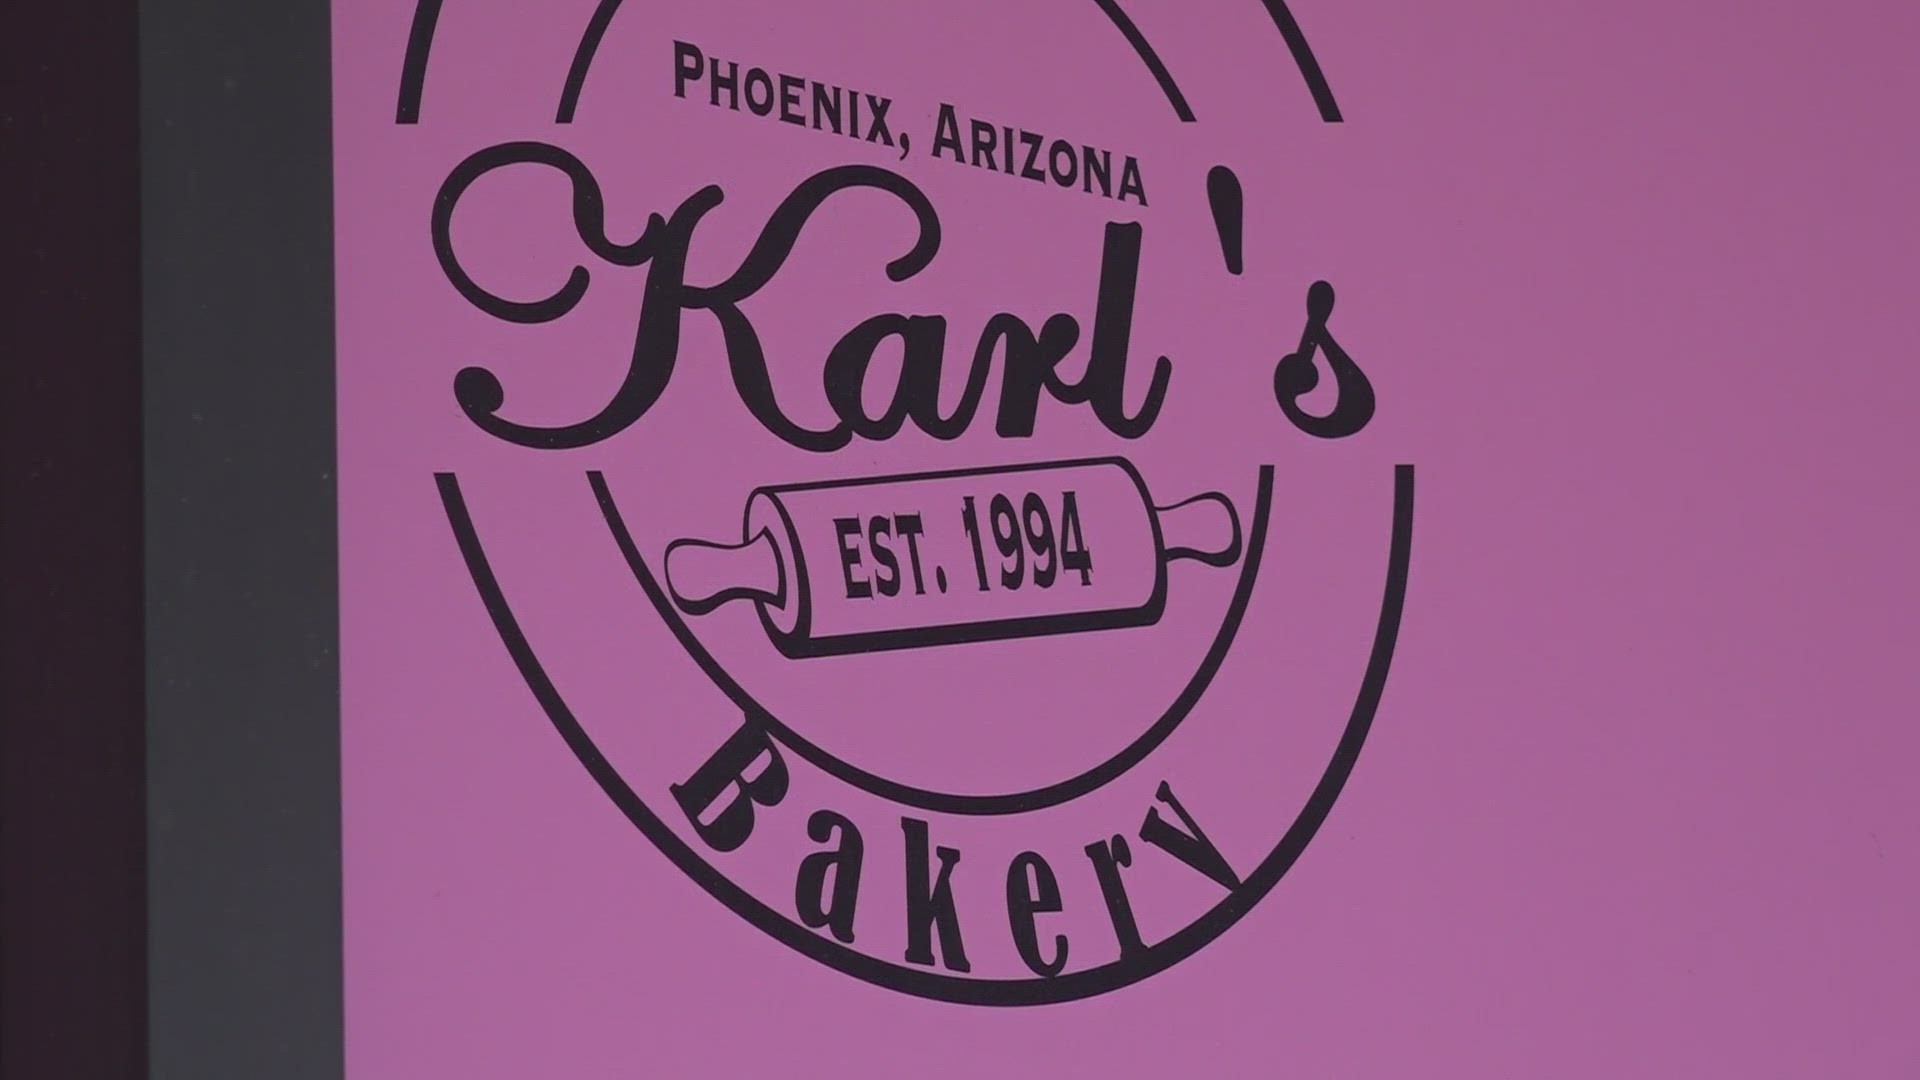 Karl's Bakery has been serving cookies, croissants and more in north Phoenix for 30 years. But now, the shop is closing down. Here's why and what's next.